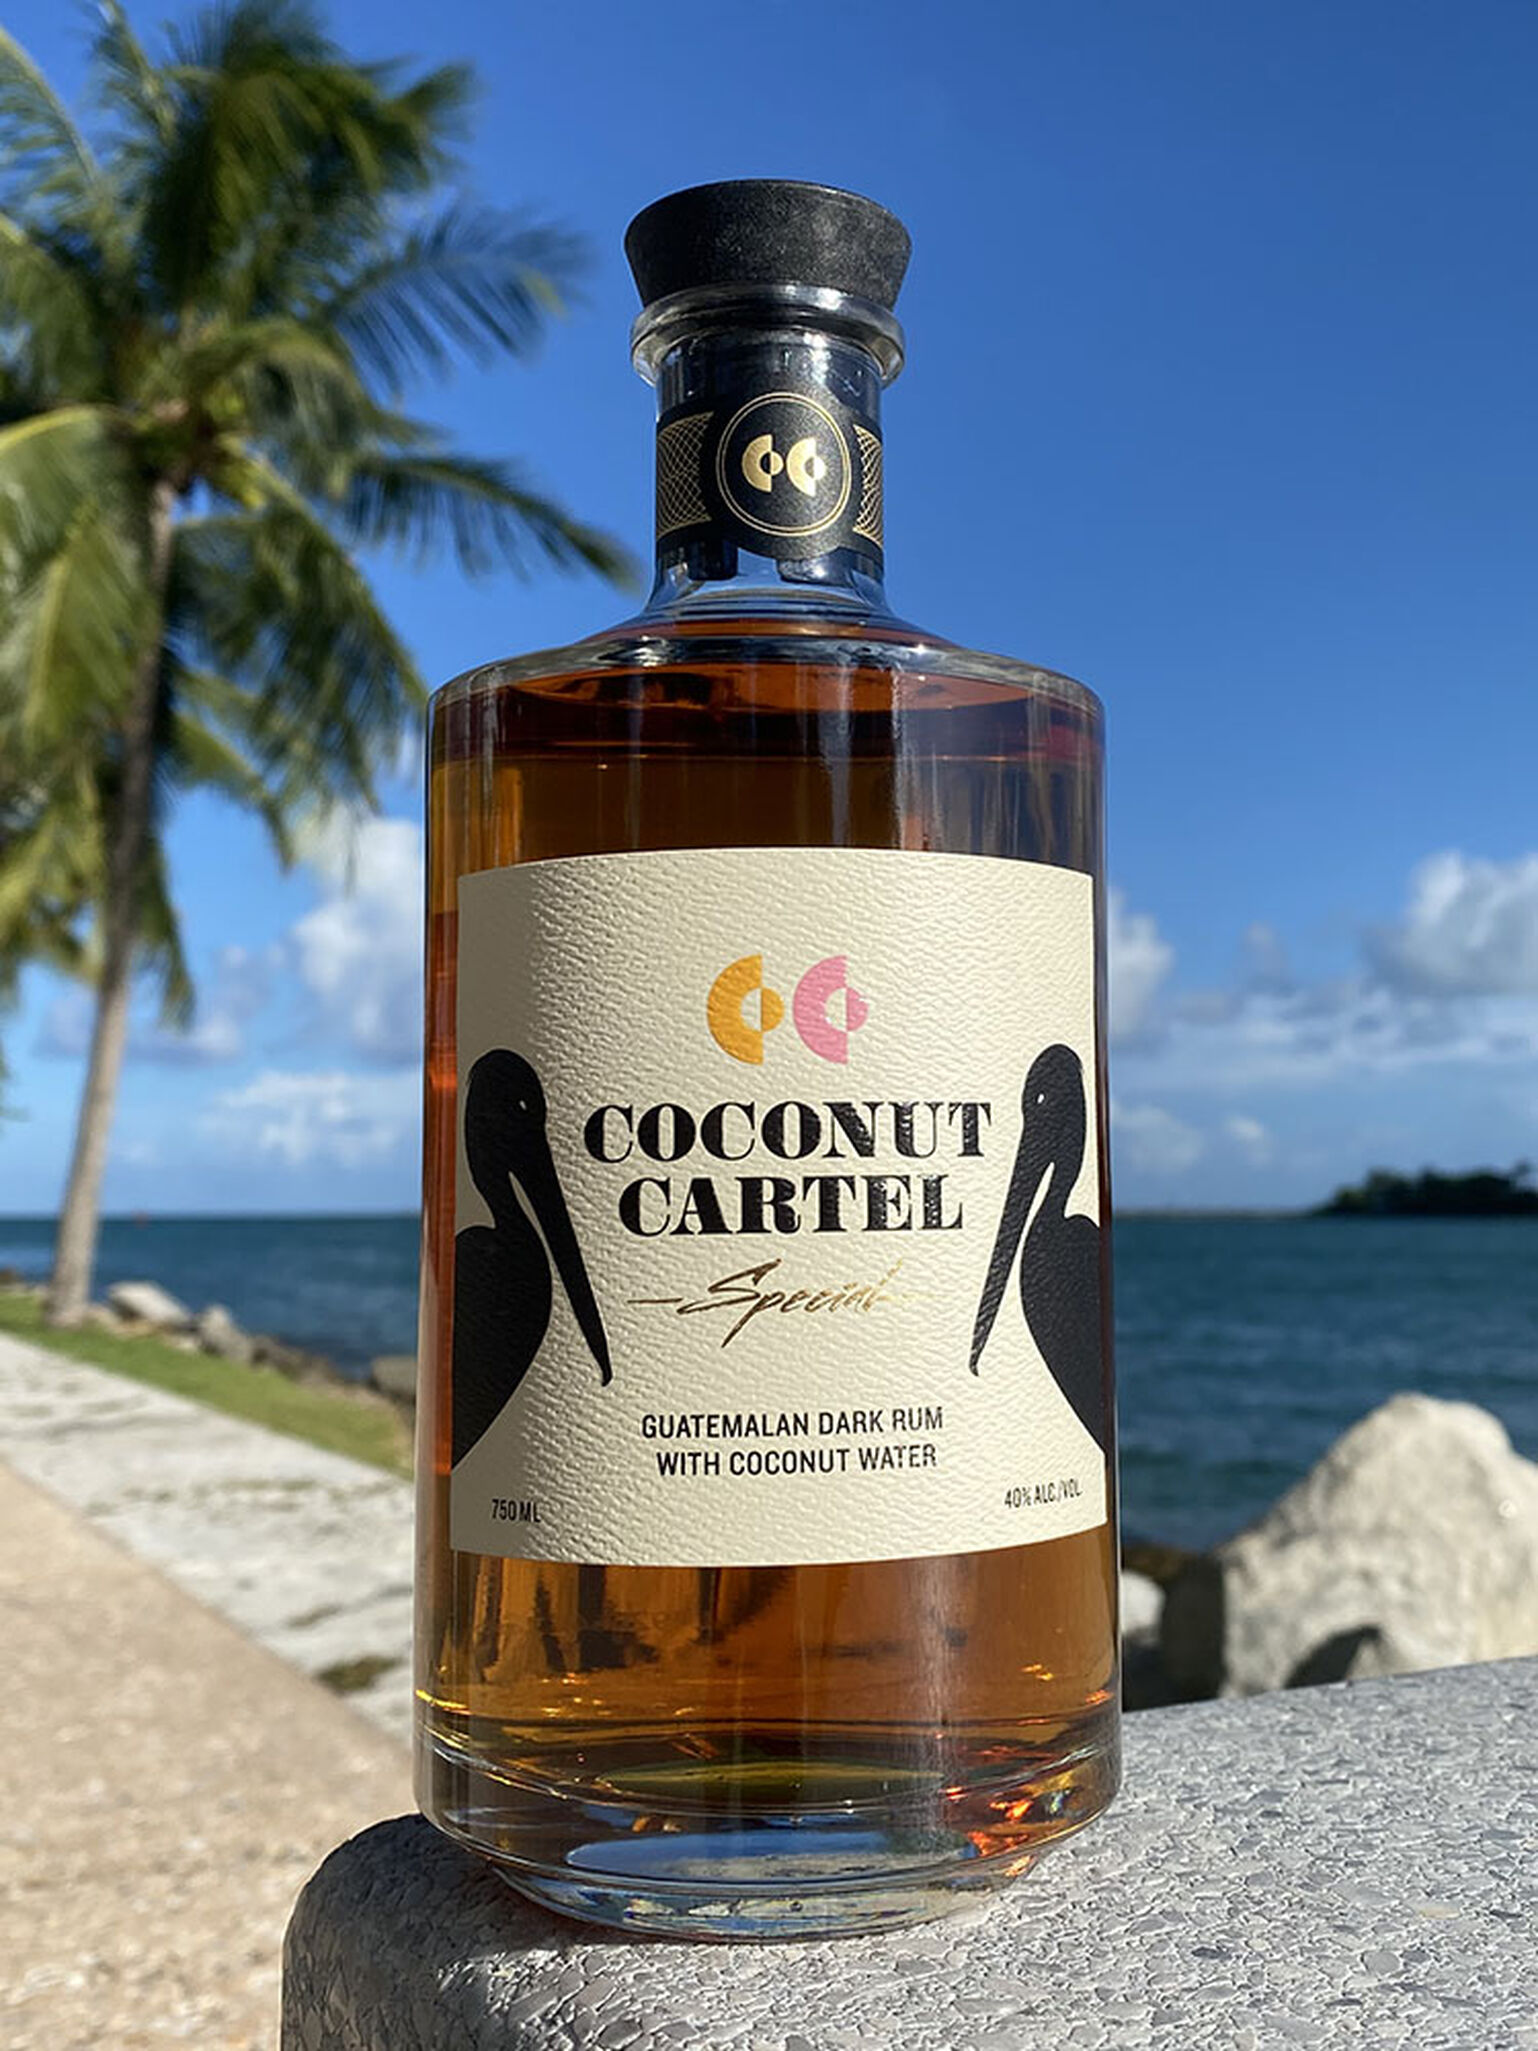 Coconut Cartel Bottle with palms and water in background